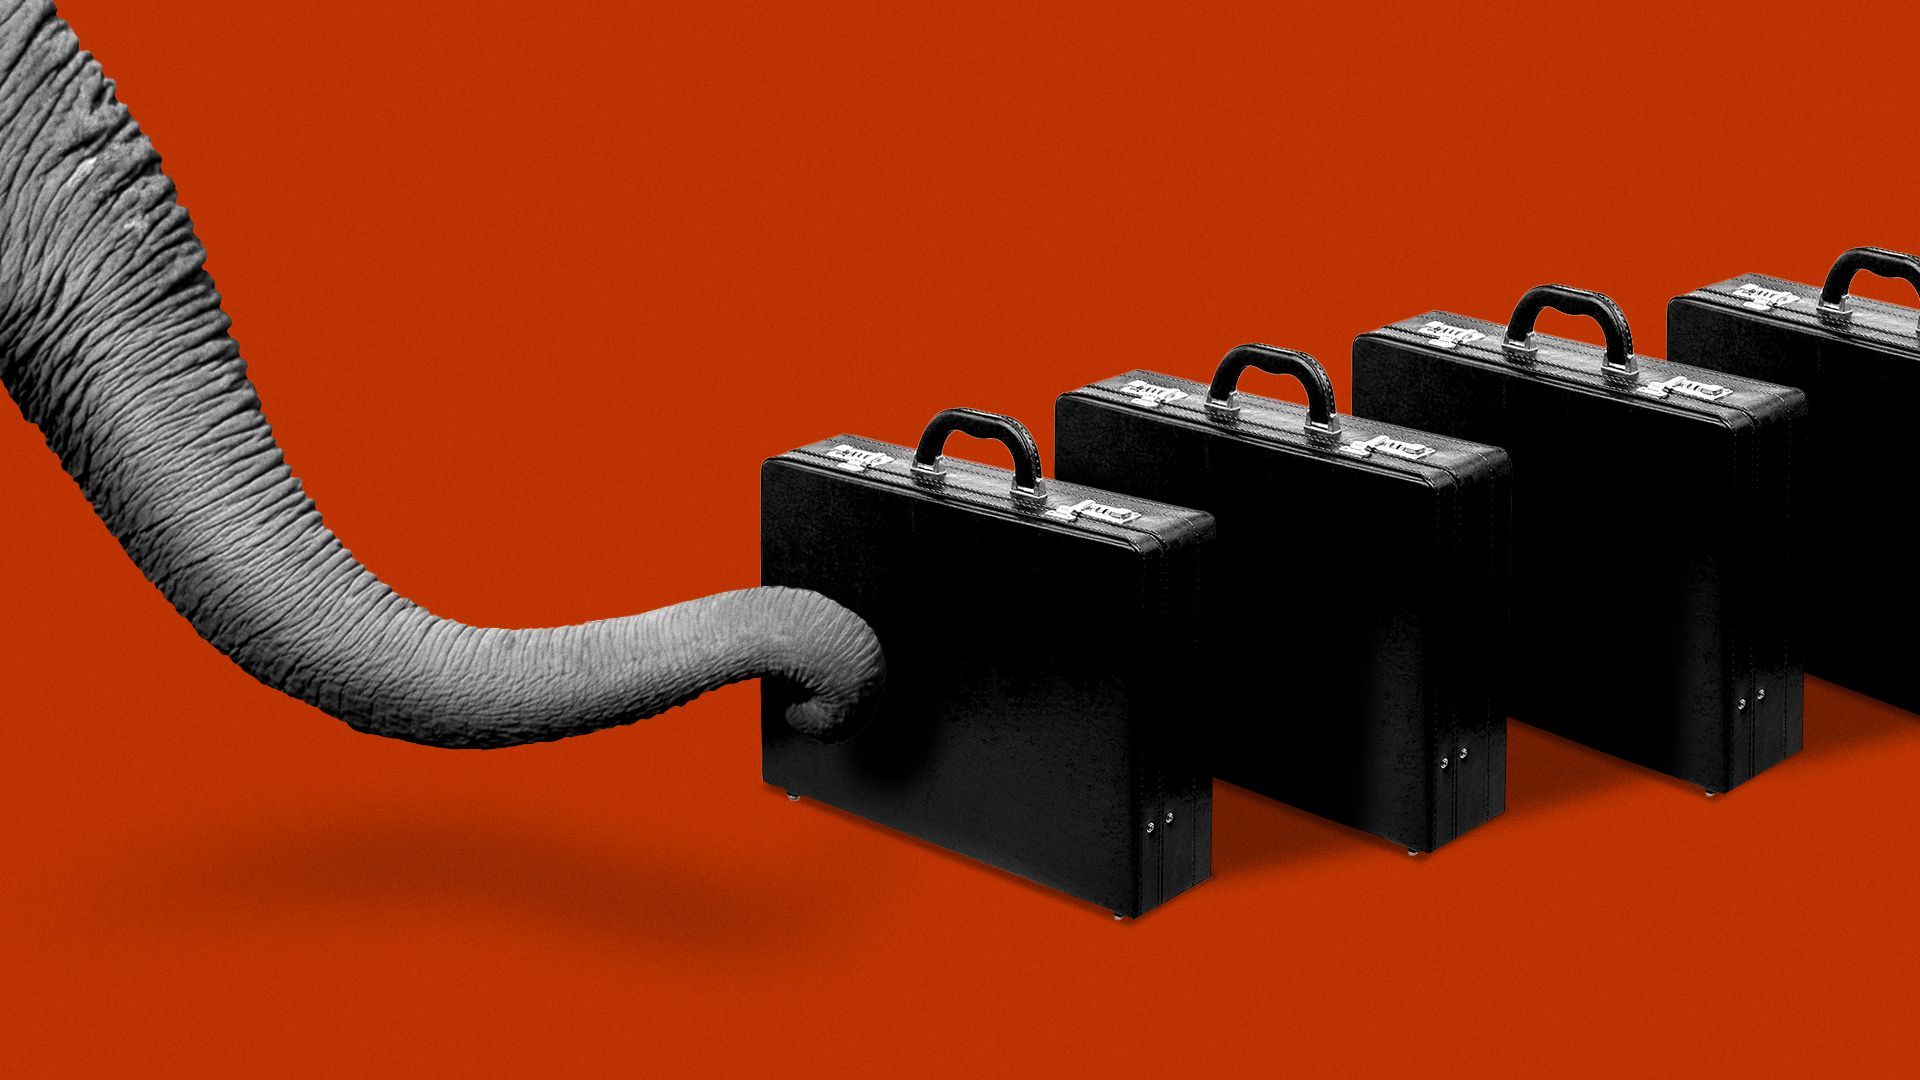 Illustration of an elephant trunk about to knock over a row of briefcases stacked like dominos.  